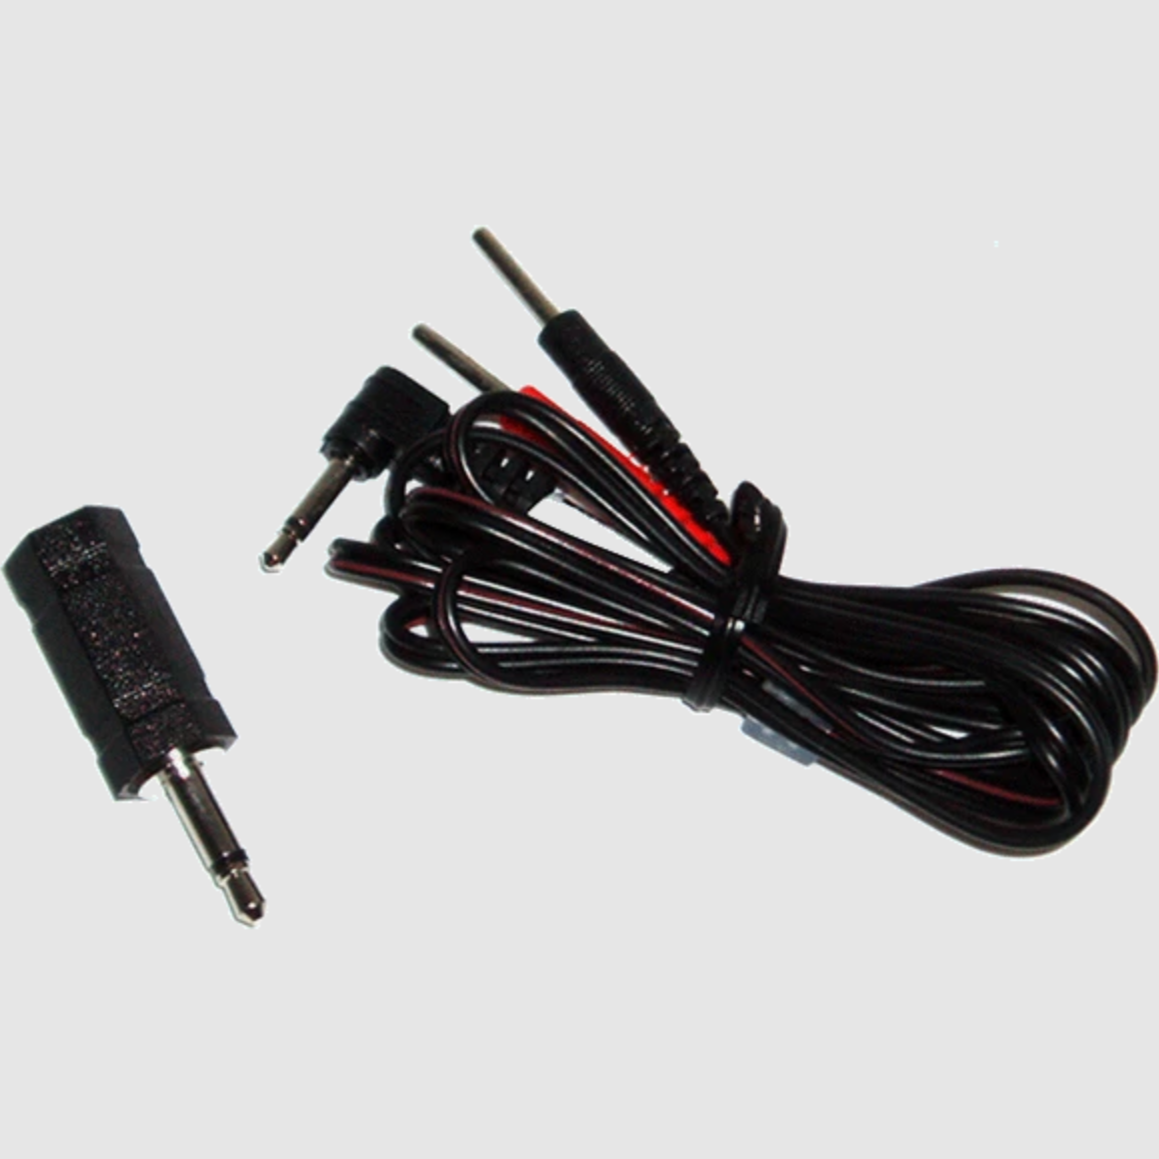 Adapter Cable Kit- 3.5mm/2.5mm Jack (6867543294116)